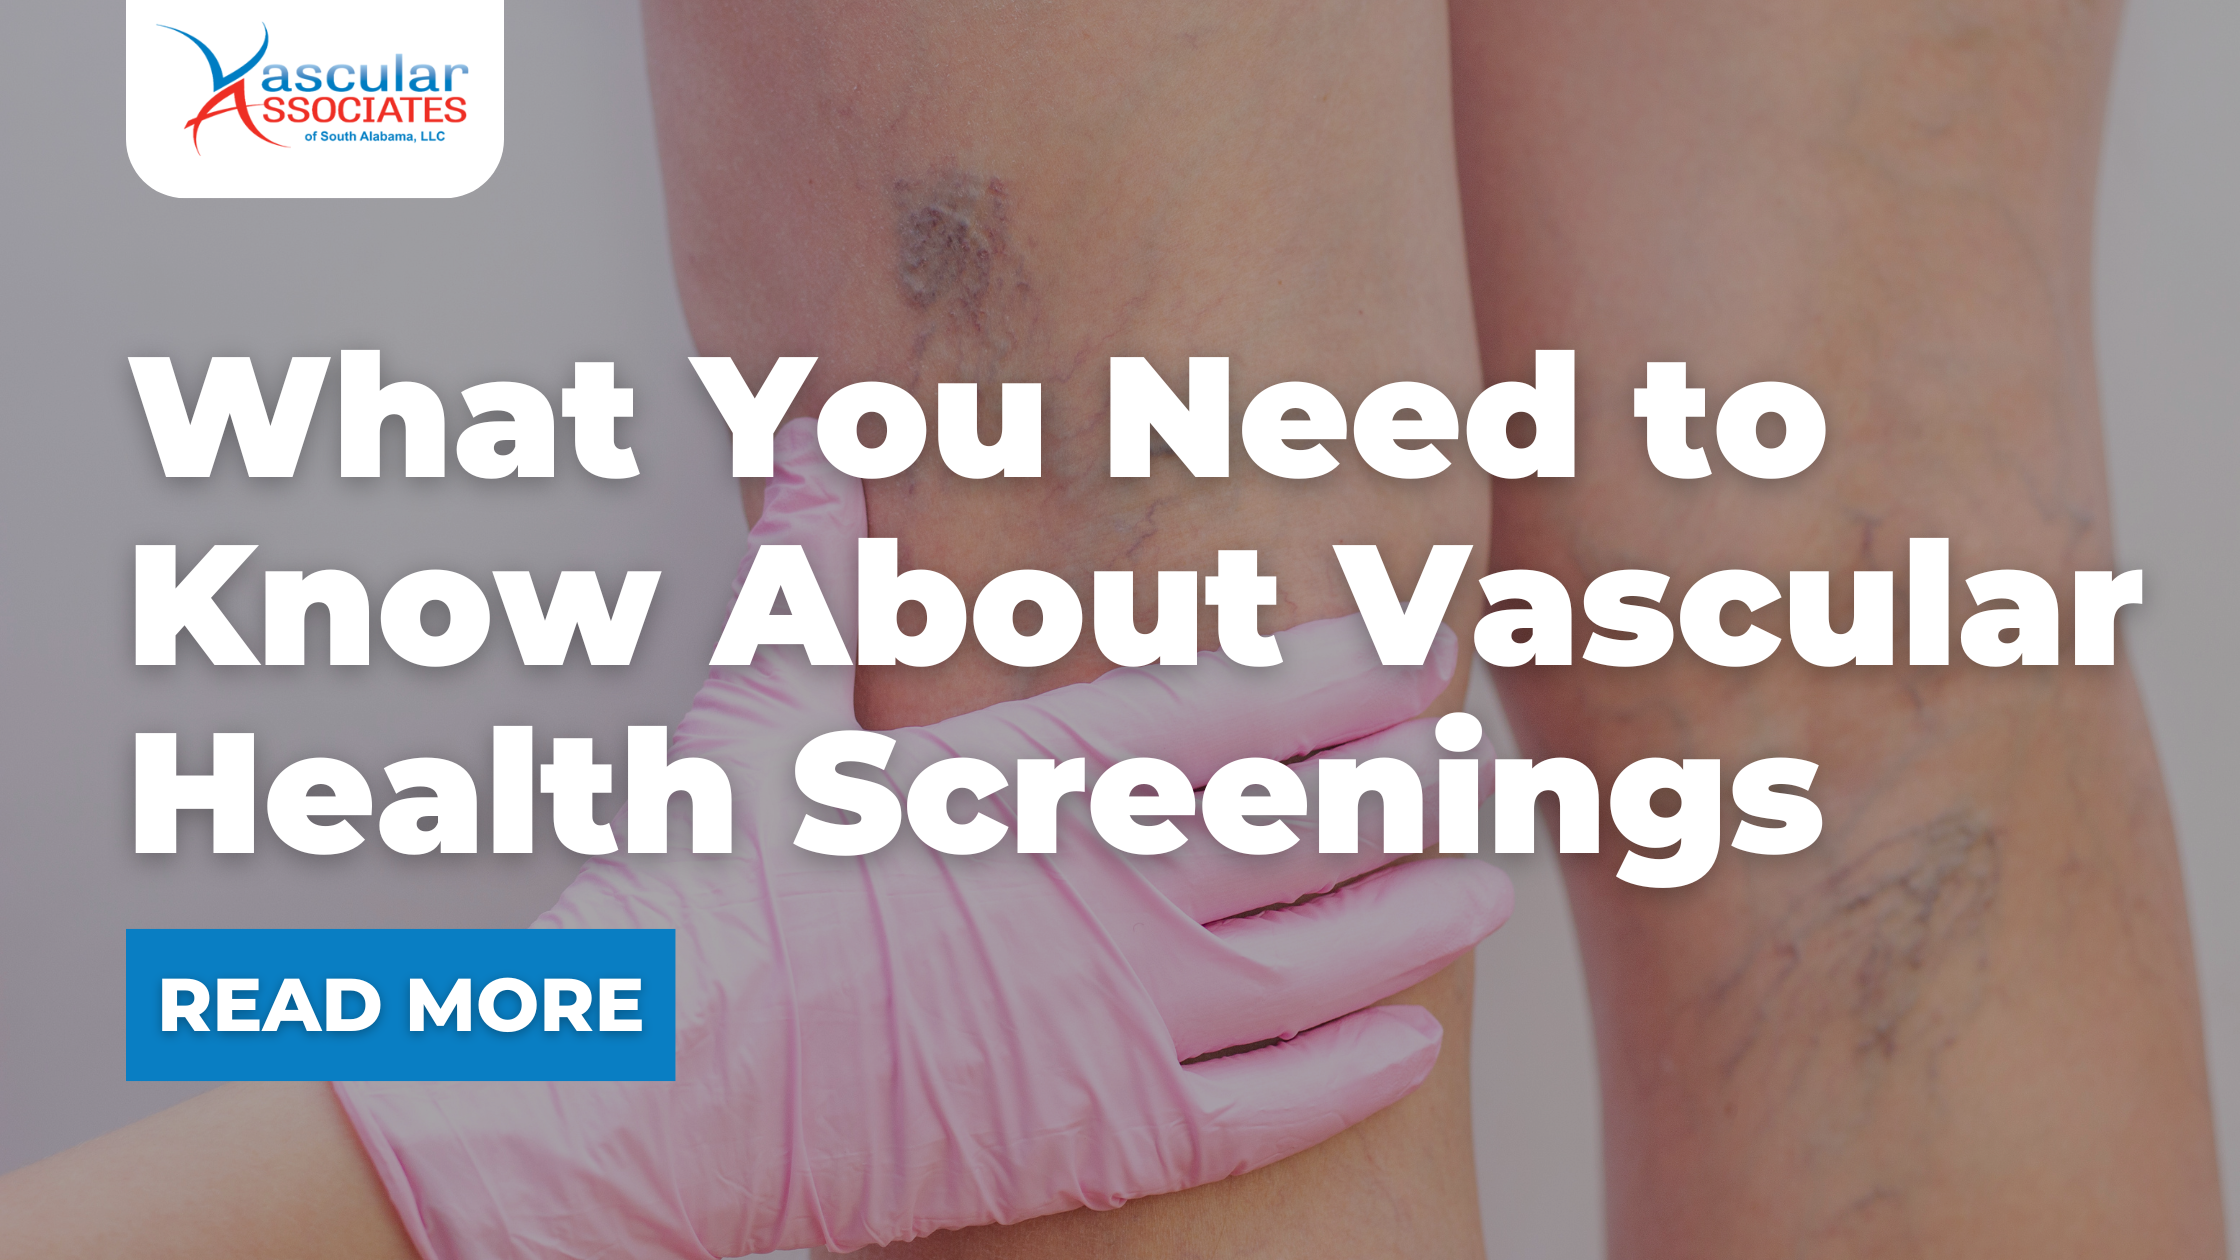 Vascular Blog - What You Need to Know About Vascular Health Screenings.png